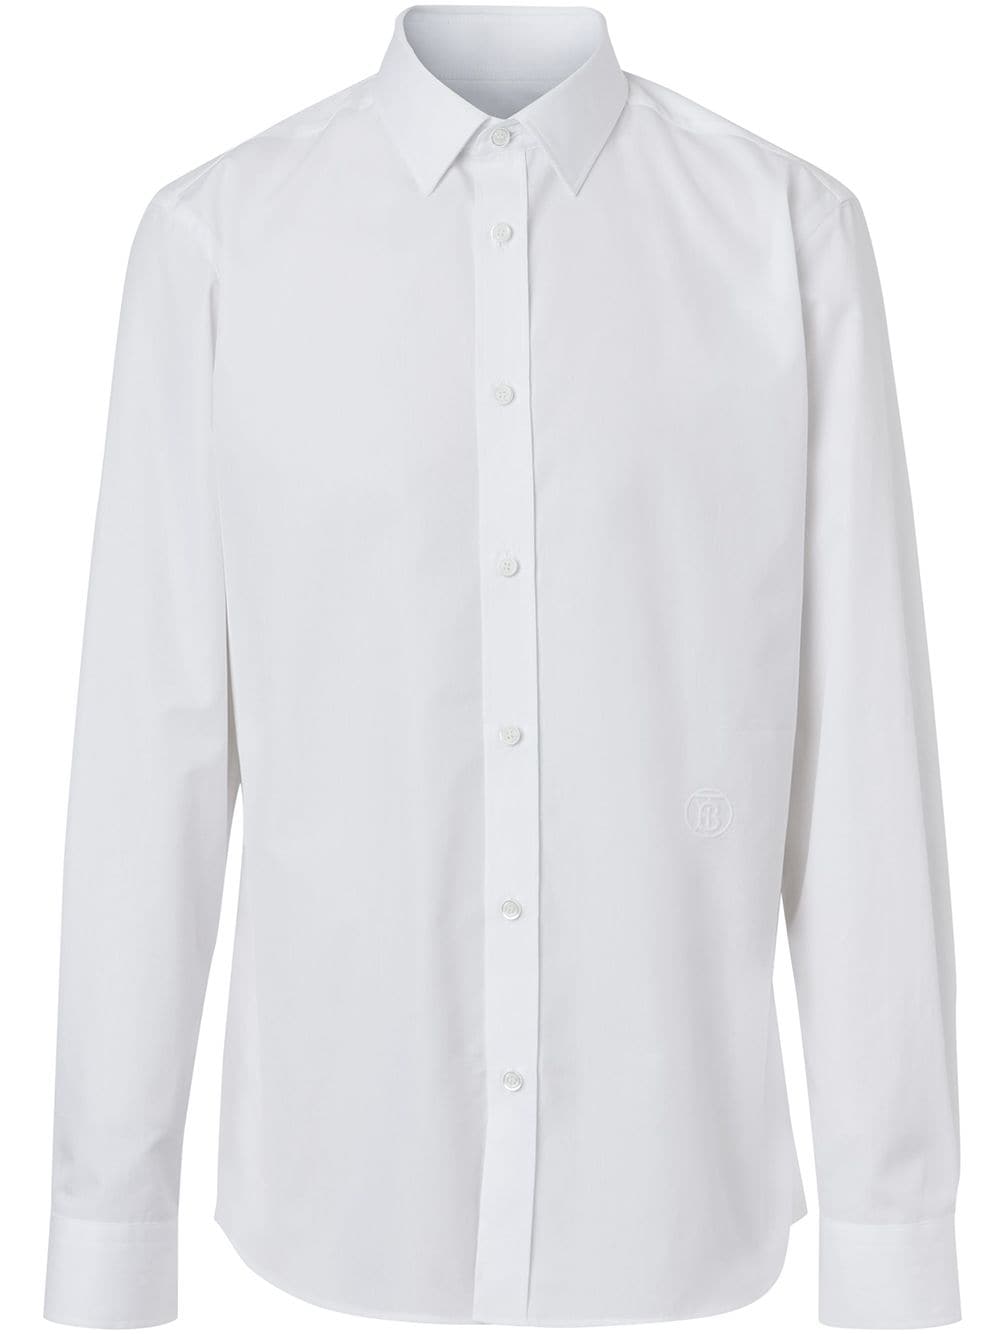 Burberry embroidered detail shirt - White